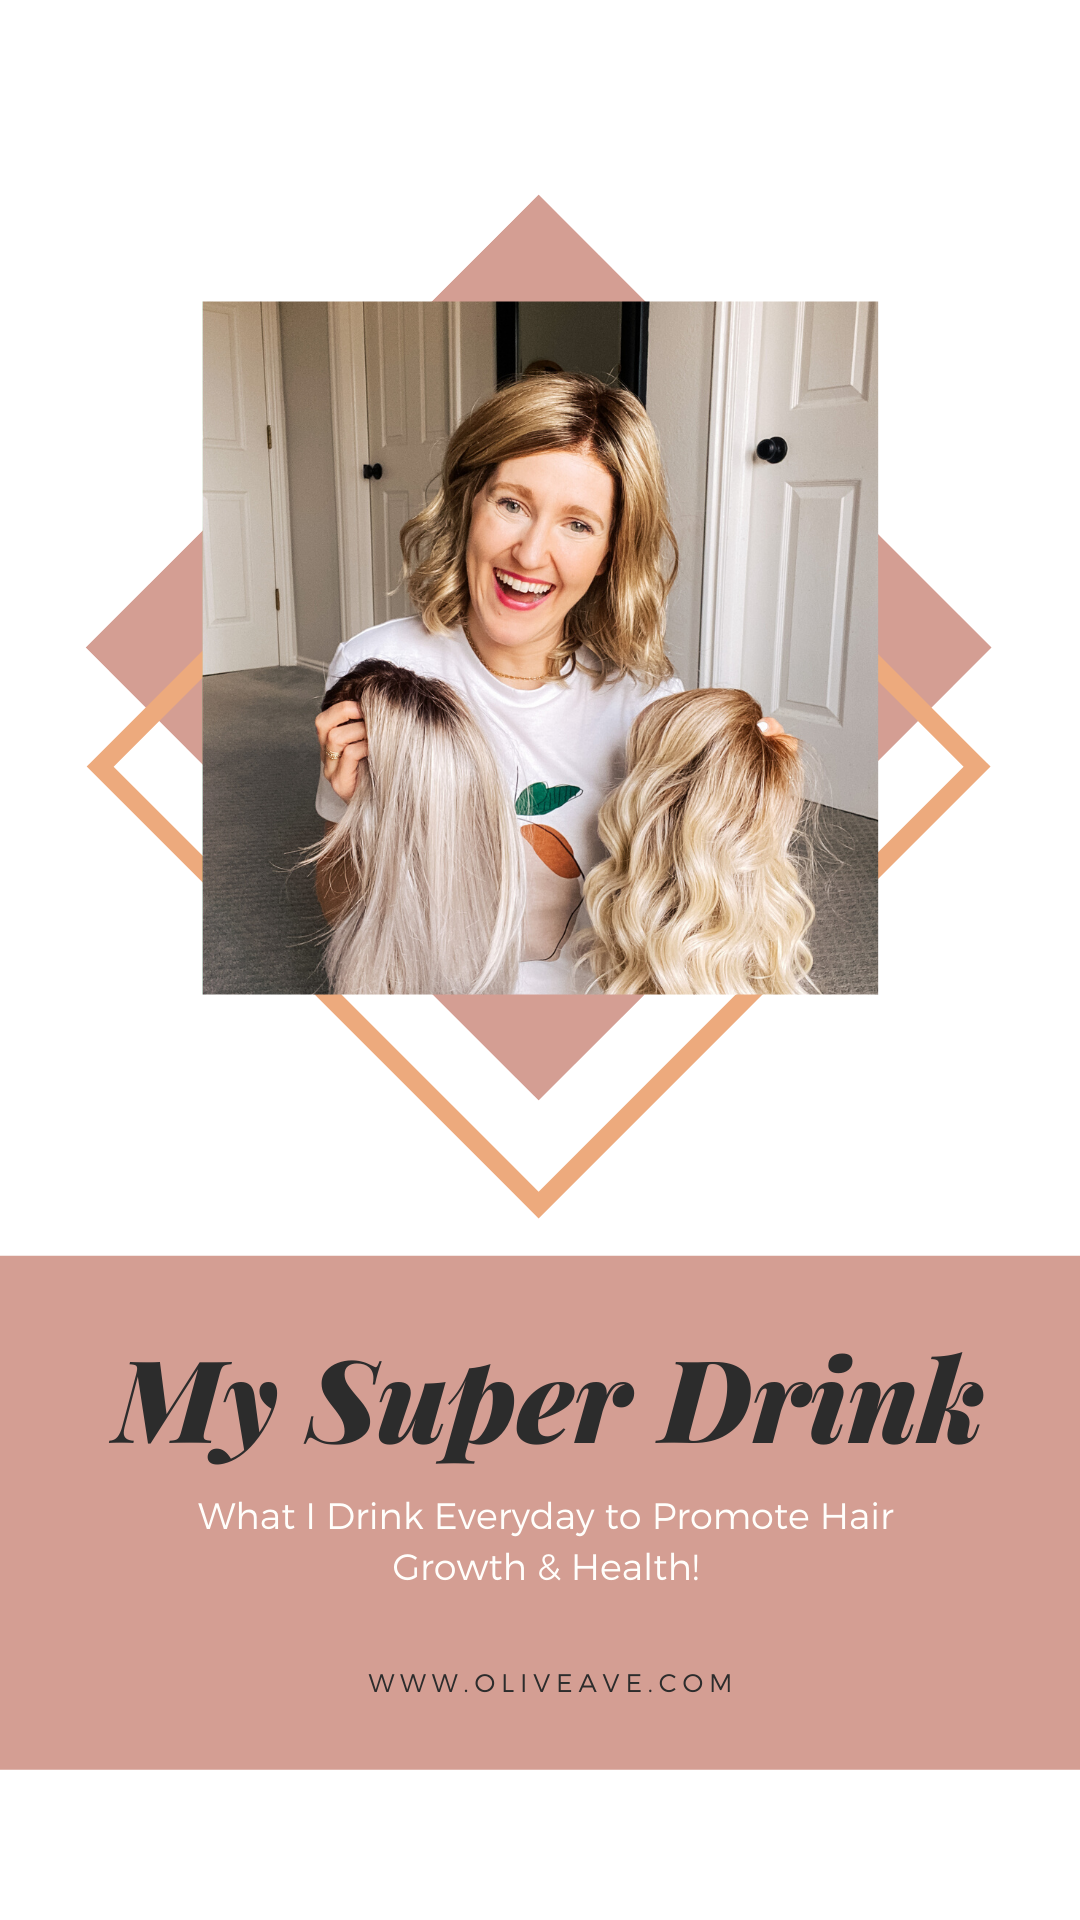 My Super Drink: What I Drink Everyday to Promote Hair Growth & Health